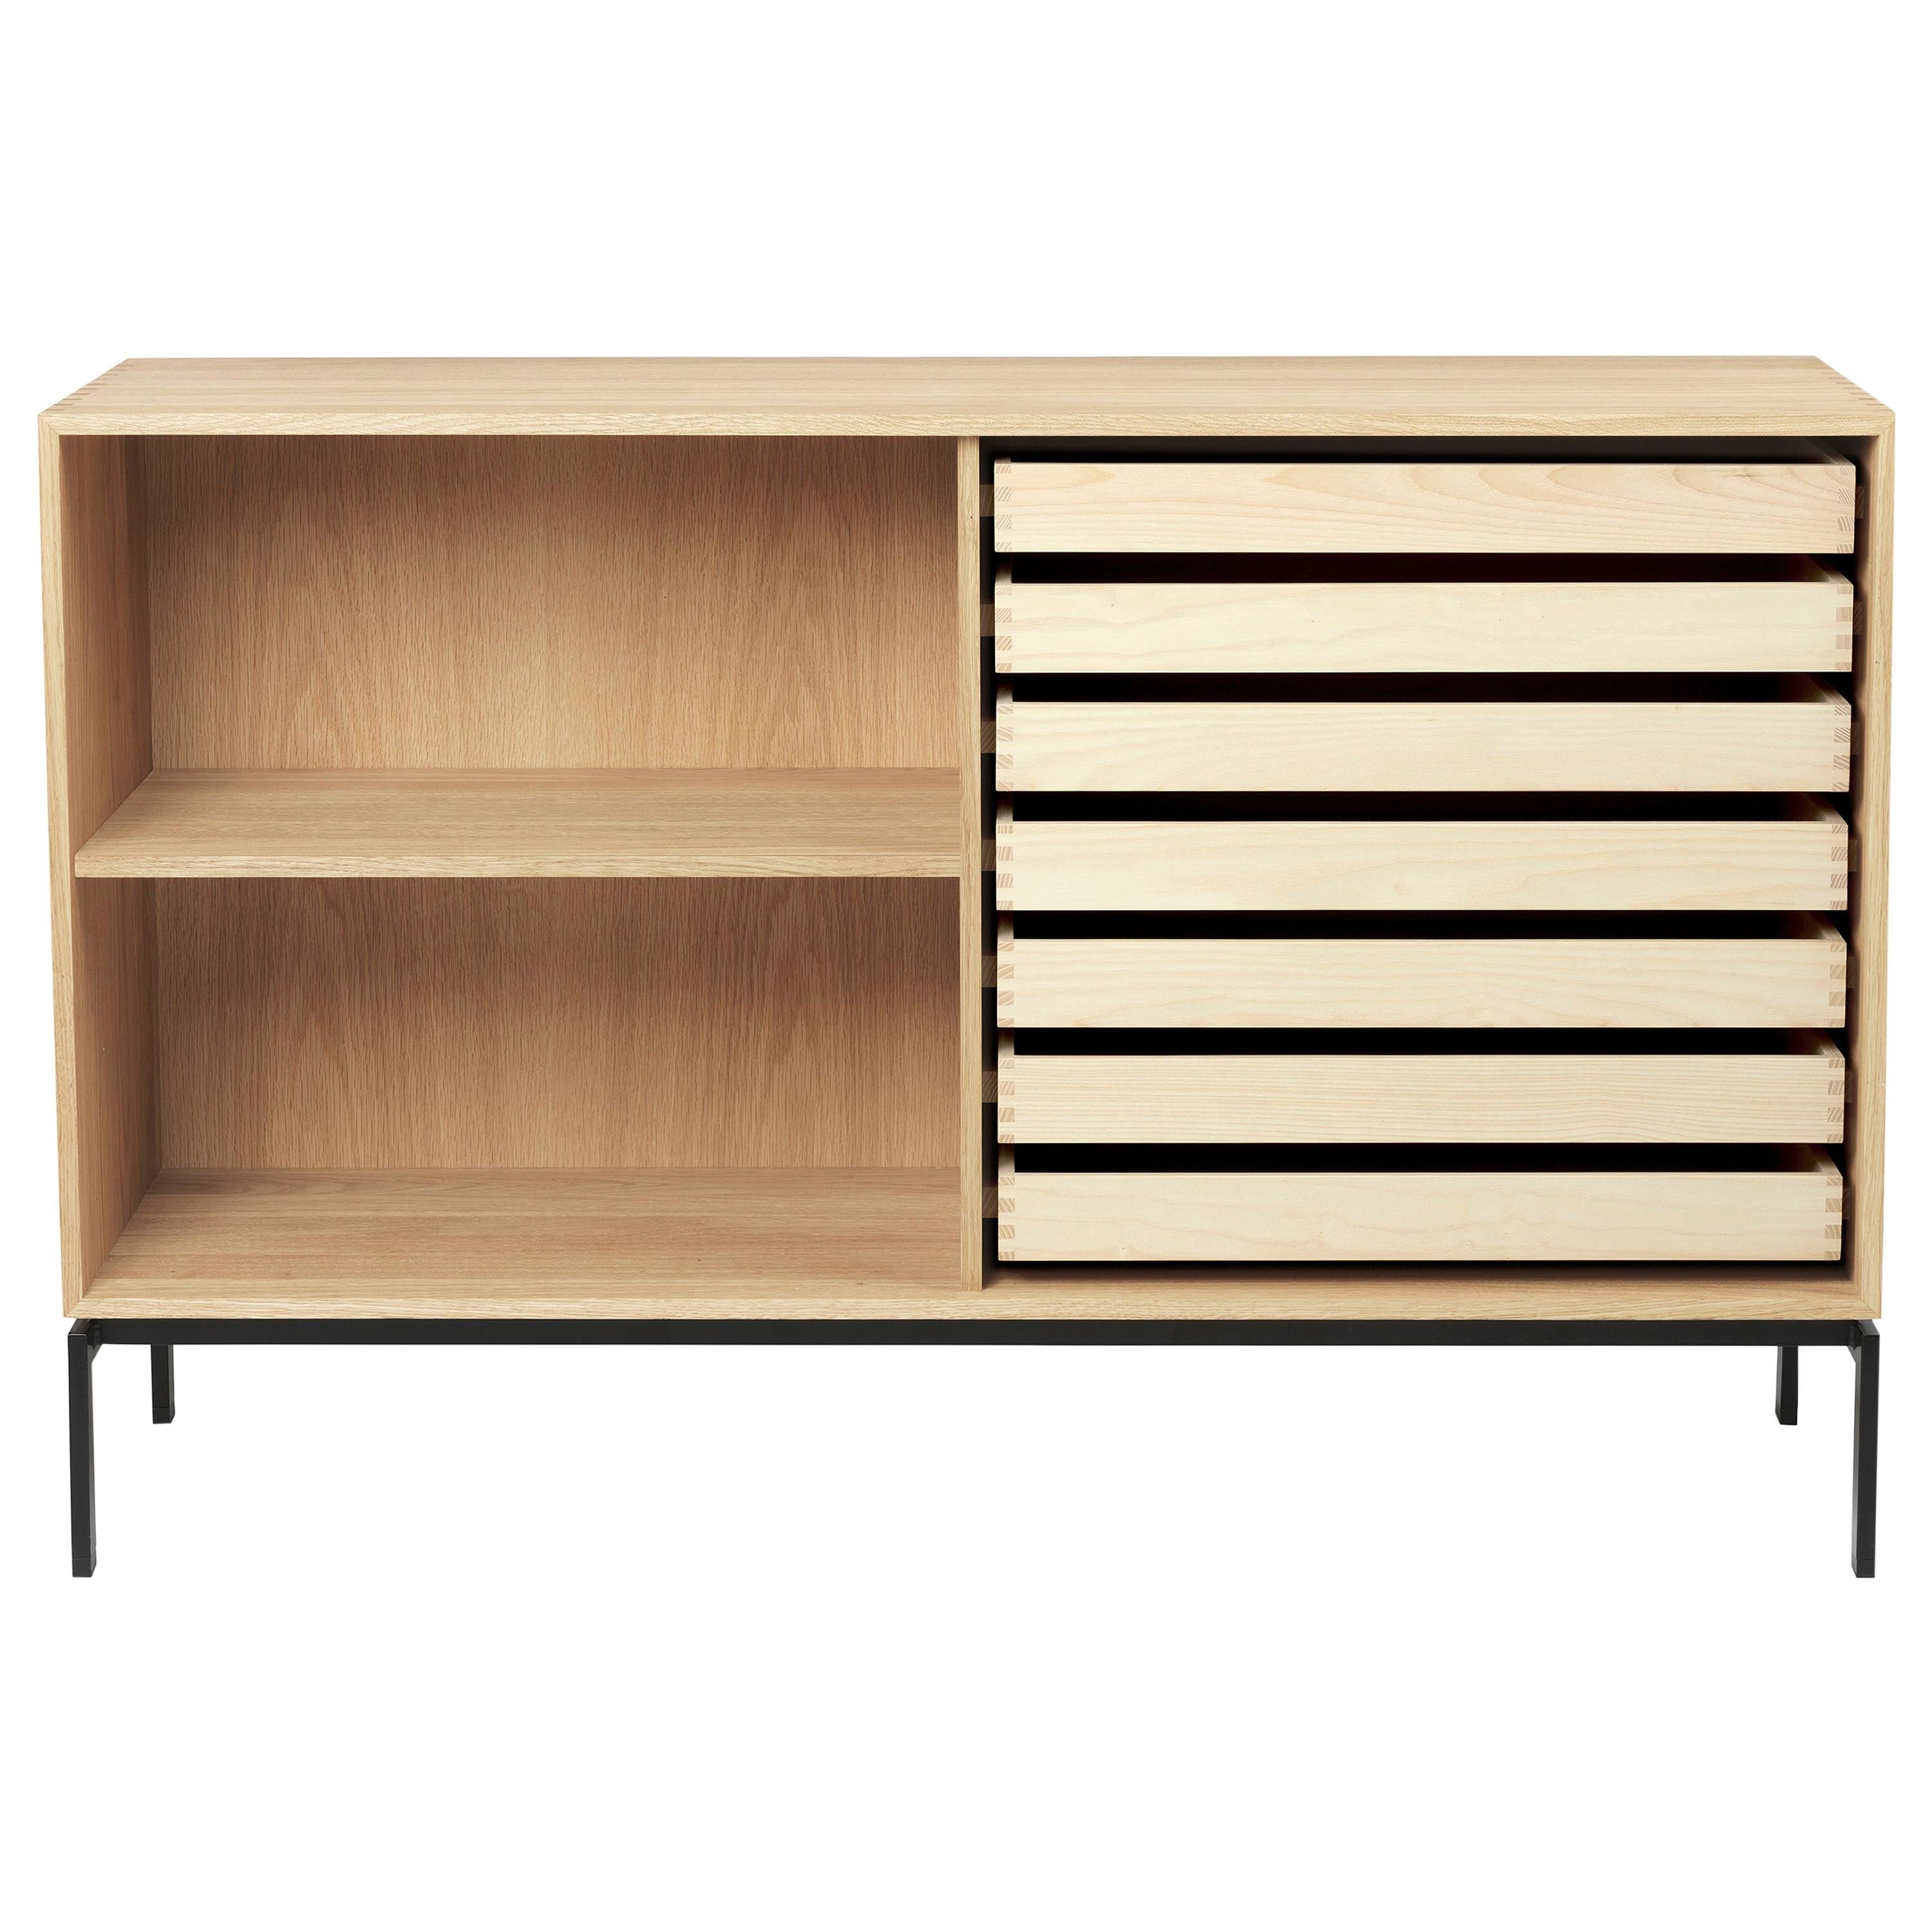 FK63 2110F Deep Cabinet with Shelf in Oak Oil with Legs by Fabricius & Kastholm